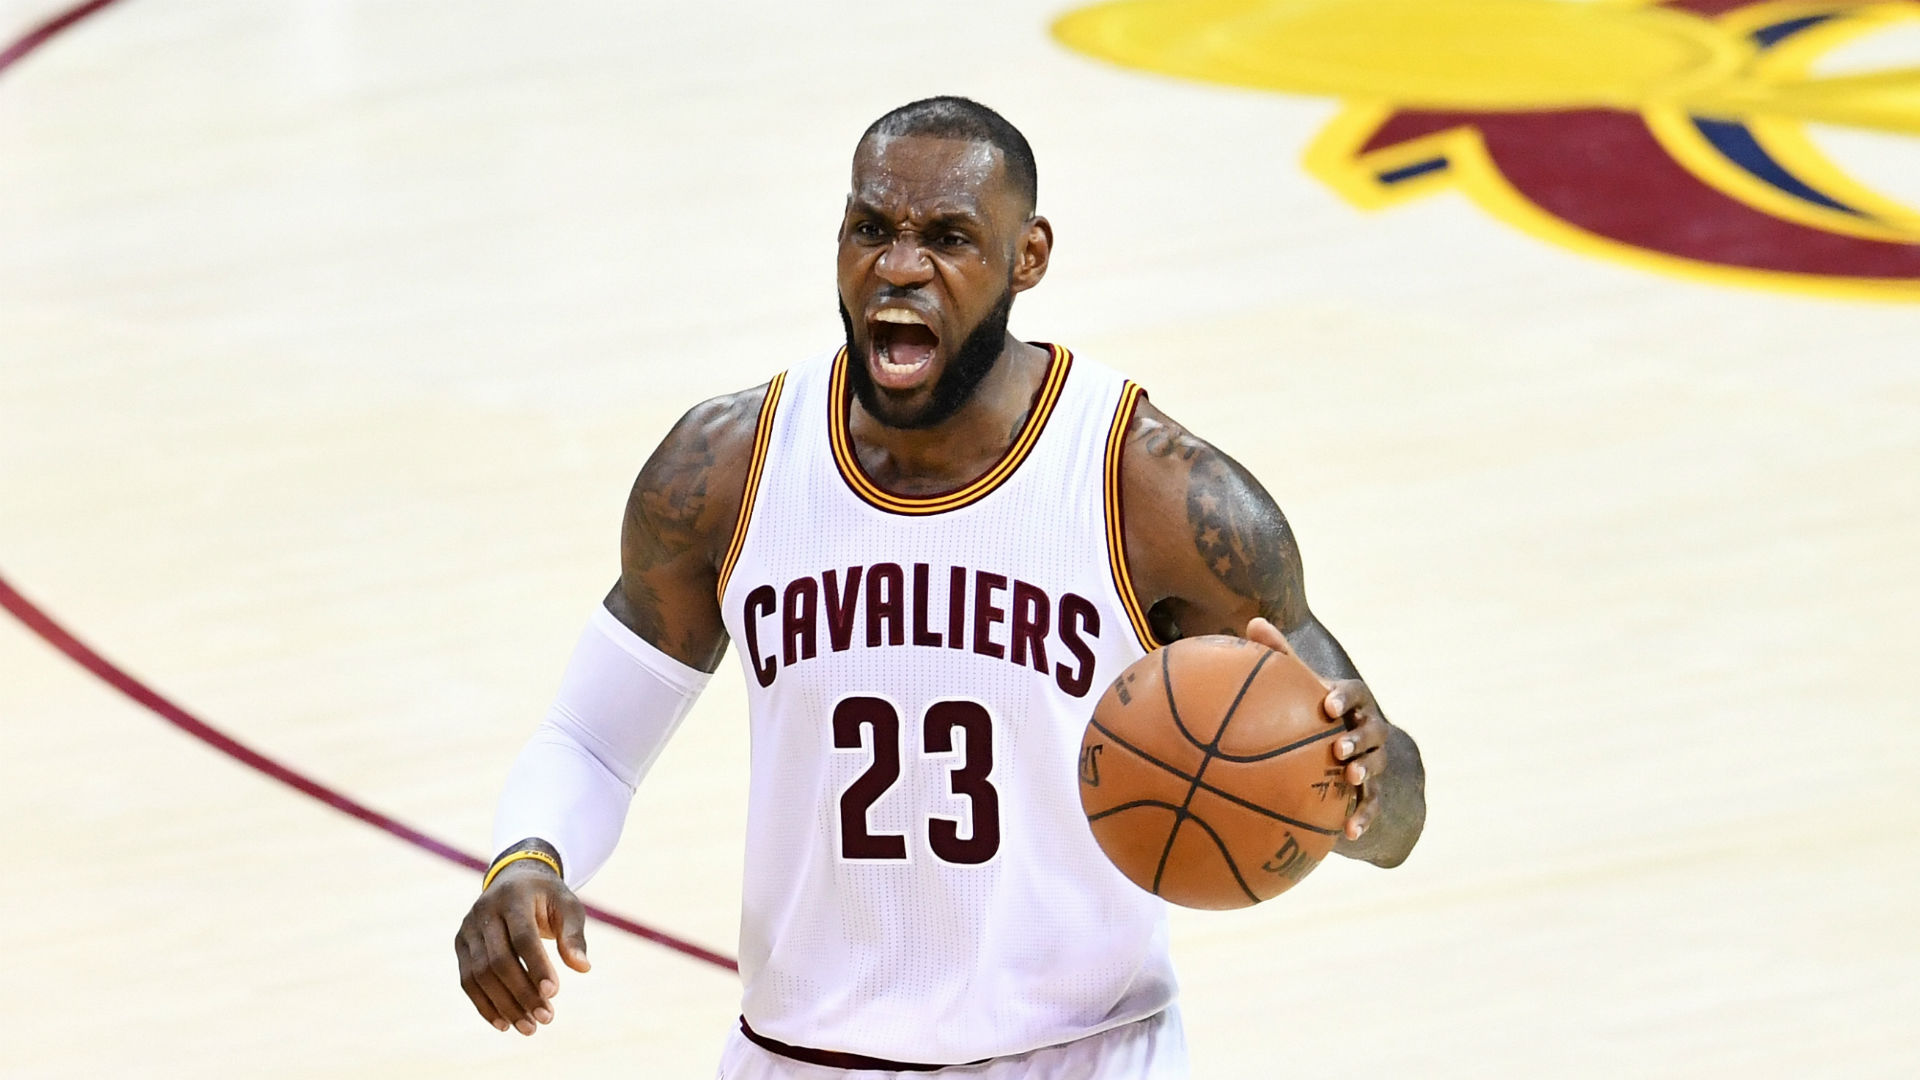 LeBron James overtakes Michael Jordan for most playoff points in NBA history